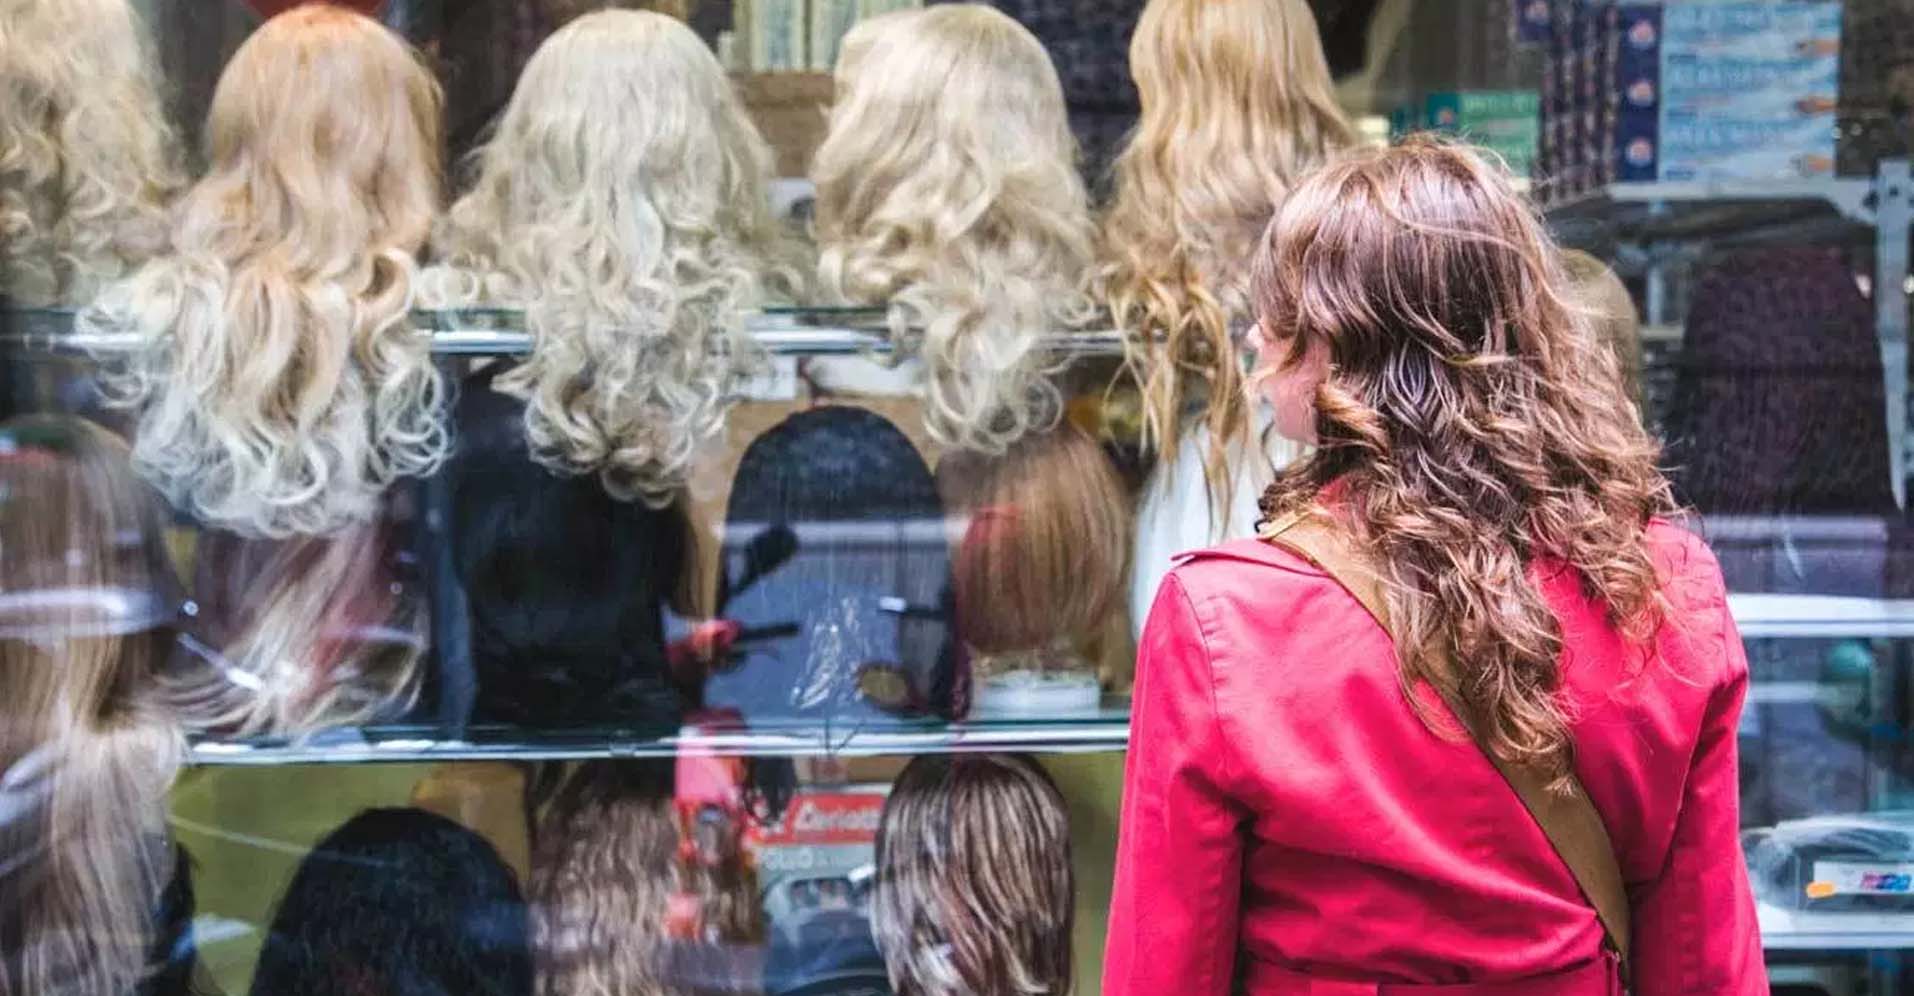 Why some women lose their hair faster than others, the shameful secret many hair care companies don't want you to know.